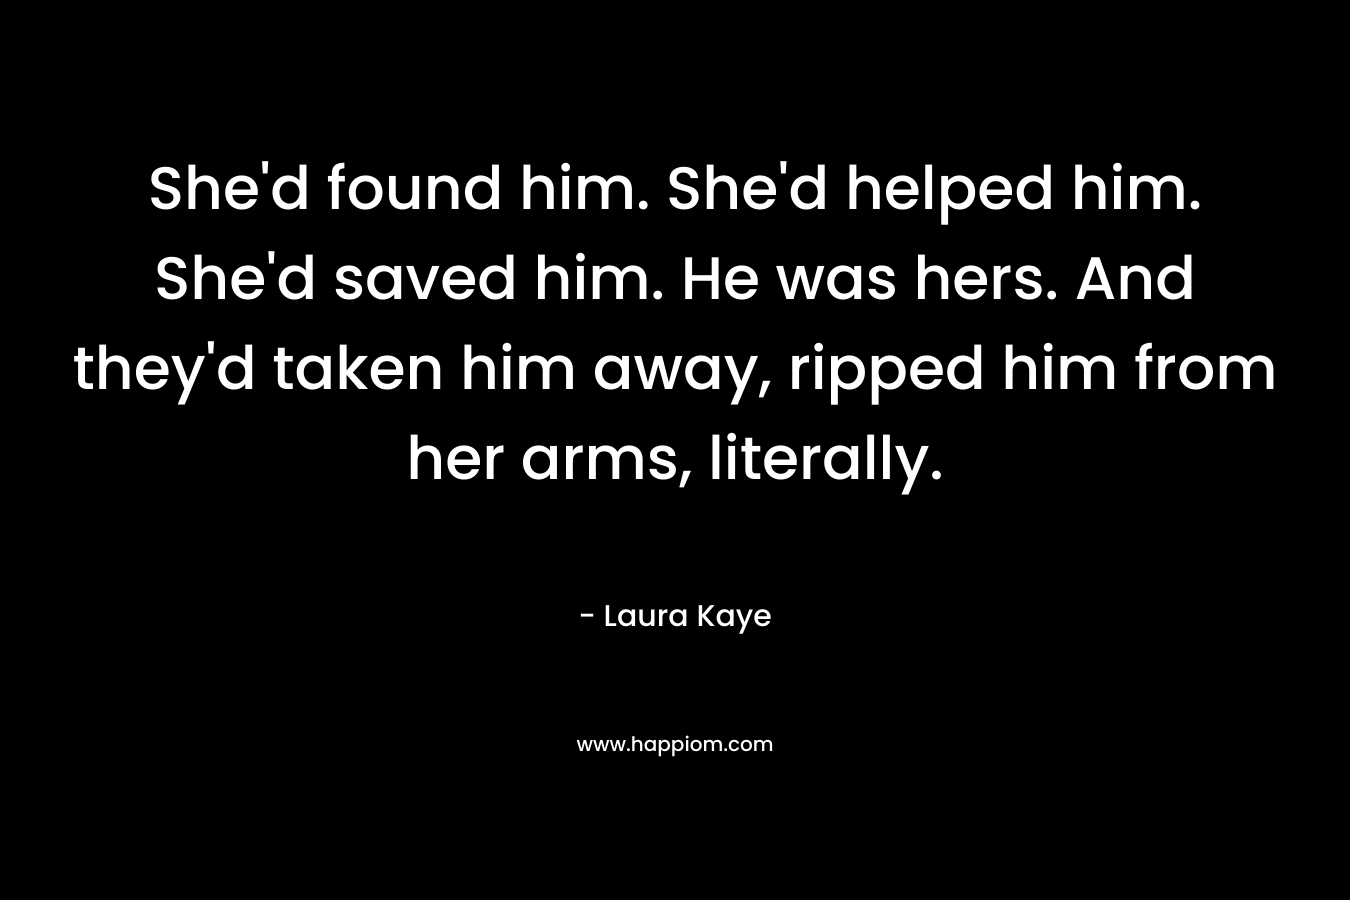 She'd found him. She'd helped him. She'd saved him. He was hers. And they'd taken him away, ripped him from her arms, literally.